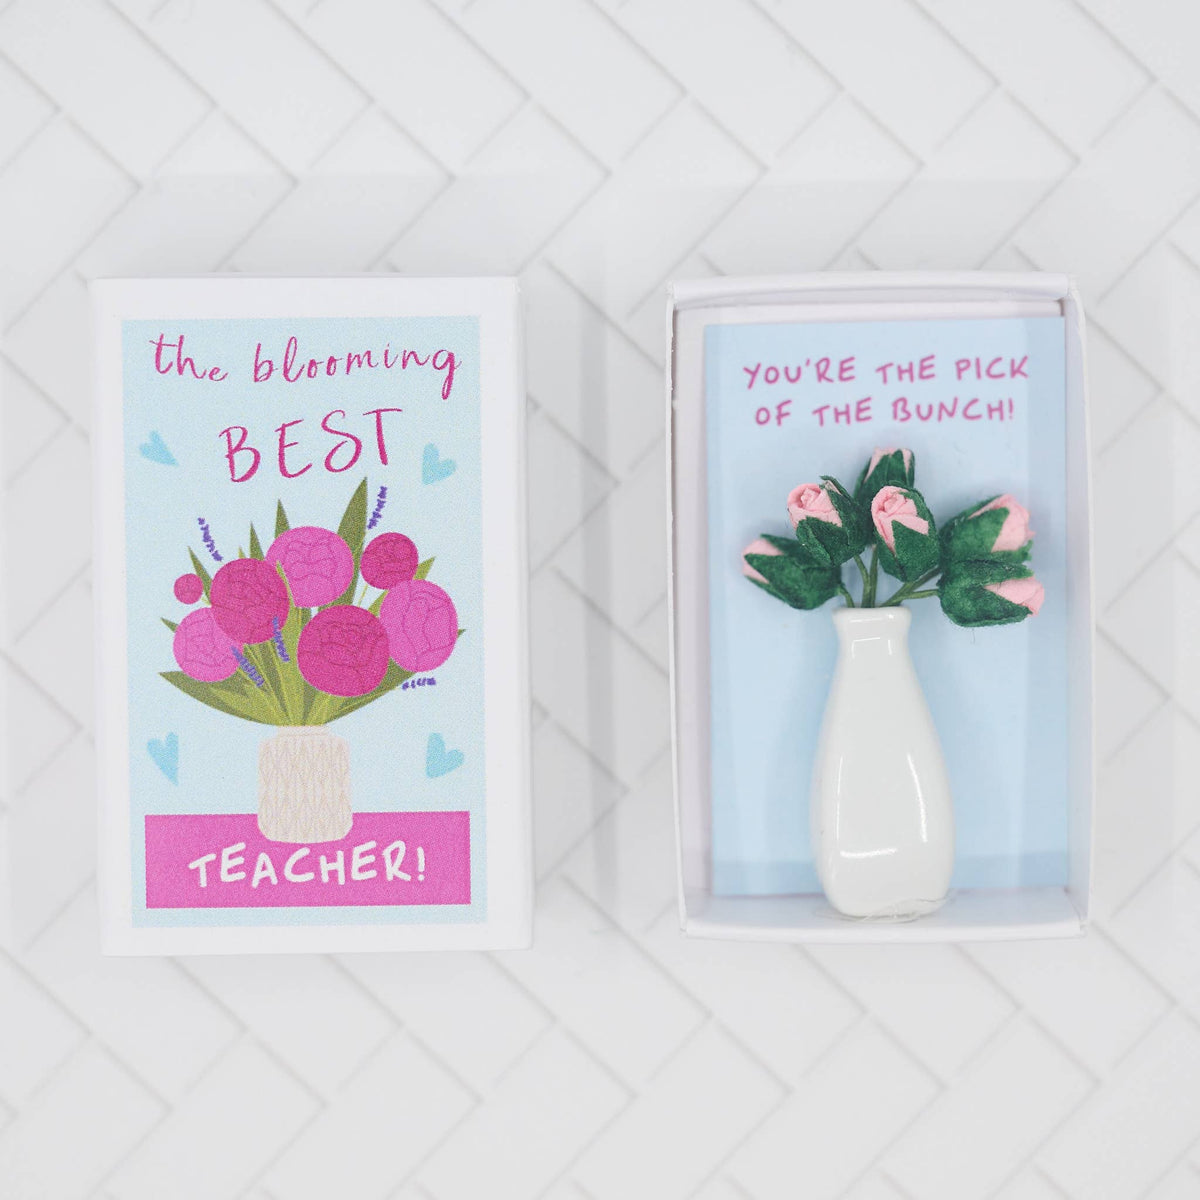 Blooming Best Teacher In A Matchbox-Marvling Bros Ltd-Yellow Springs Toy Company